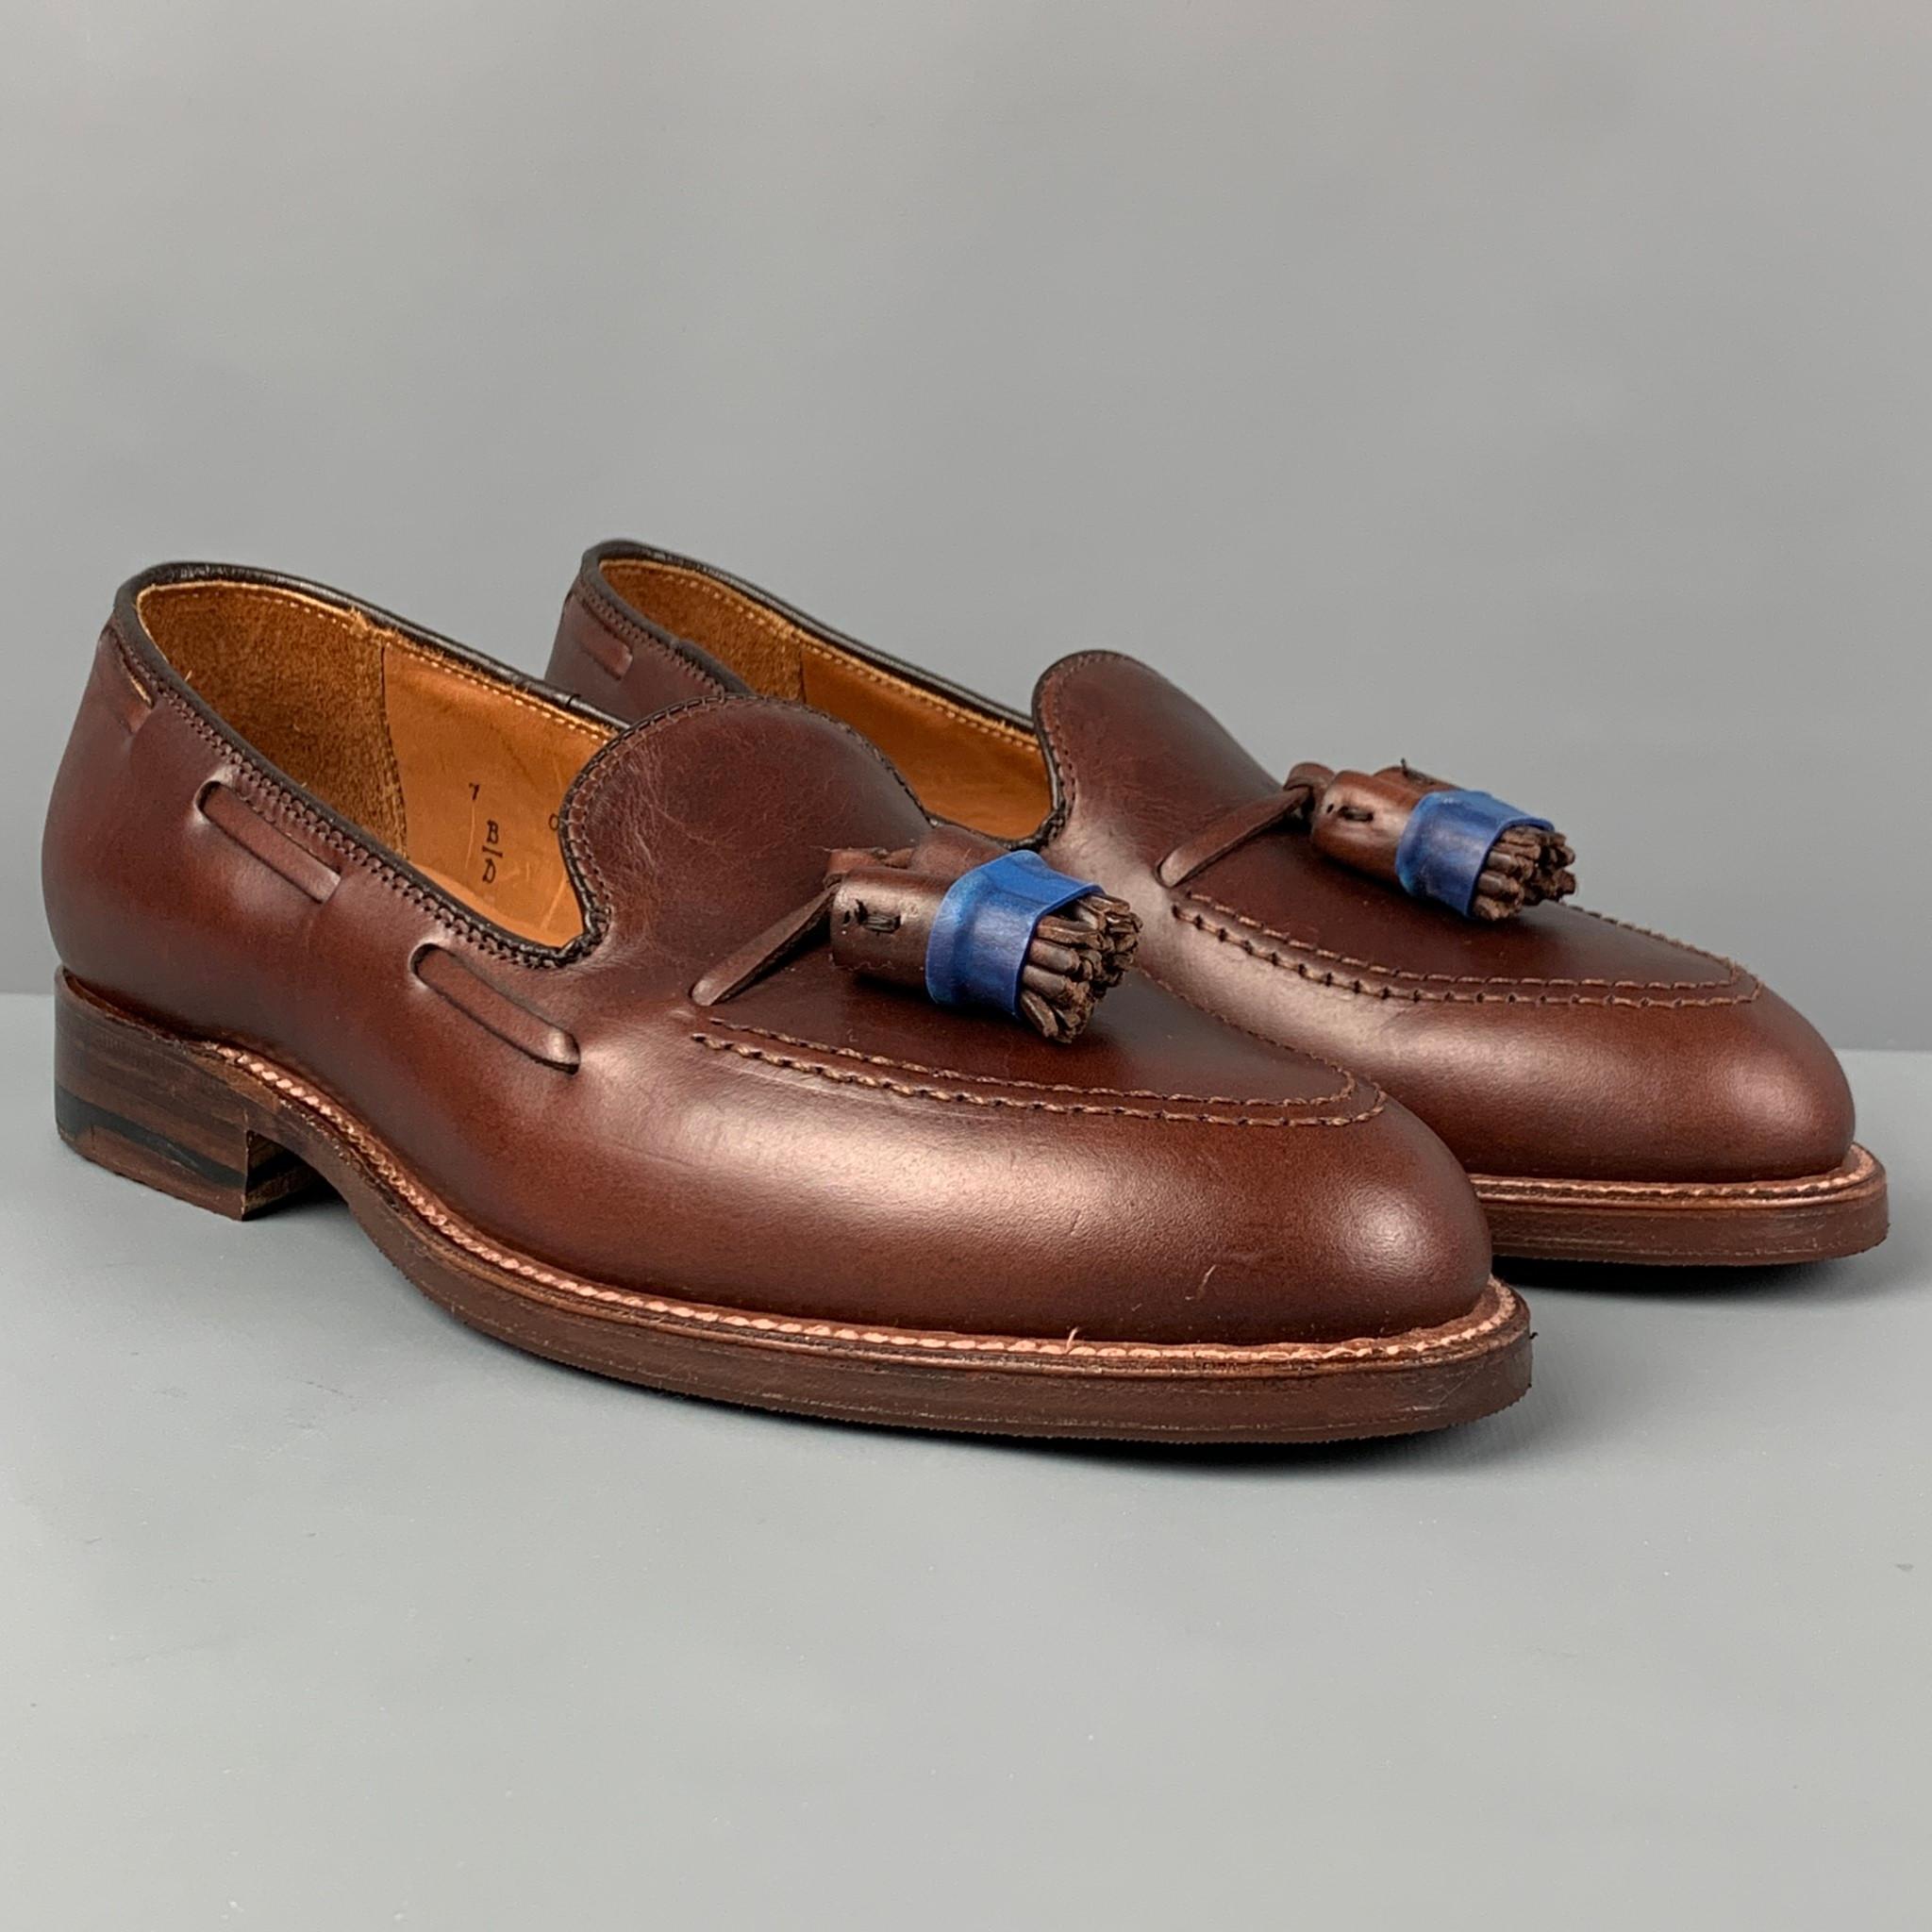 ALDEN 'Bootmaker Edition' loafers comes in a brown distressed leather featuring a front tassel design, top stitching, and a slip on style. Made in USA. 

New With Box. 
Marked: 7 B/D 0B03 027 36602

Outsole: 11 in. x 4 in.